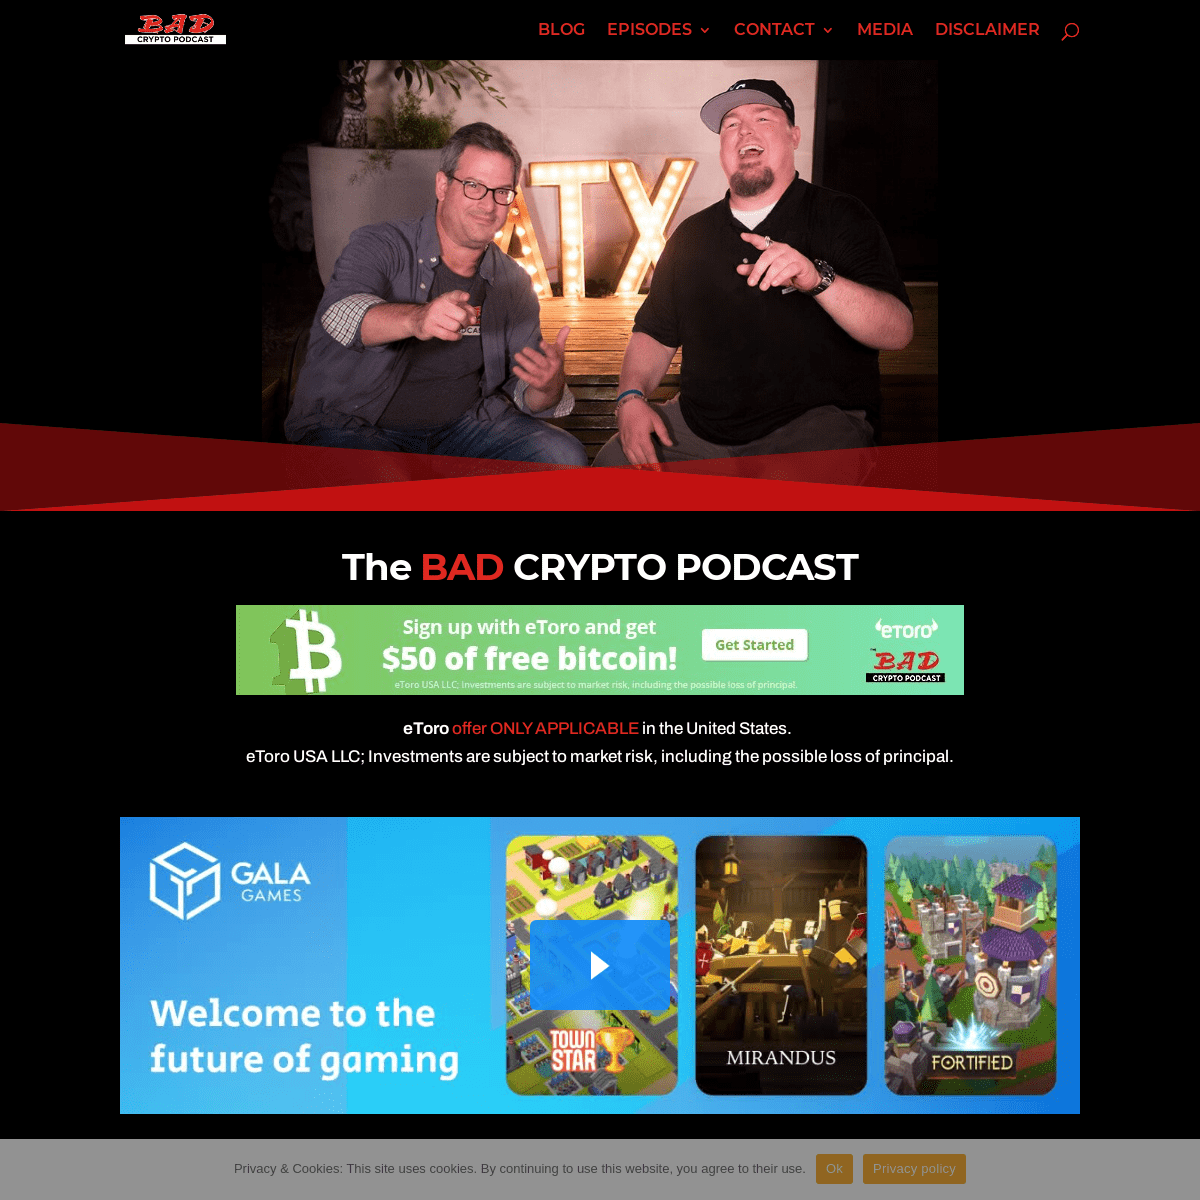 A complete backup of https://badcryptopodcast.com